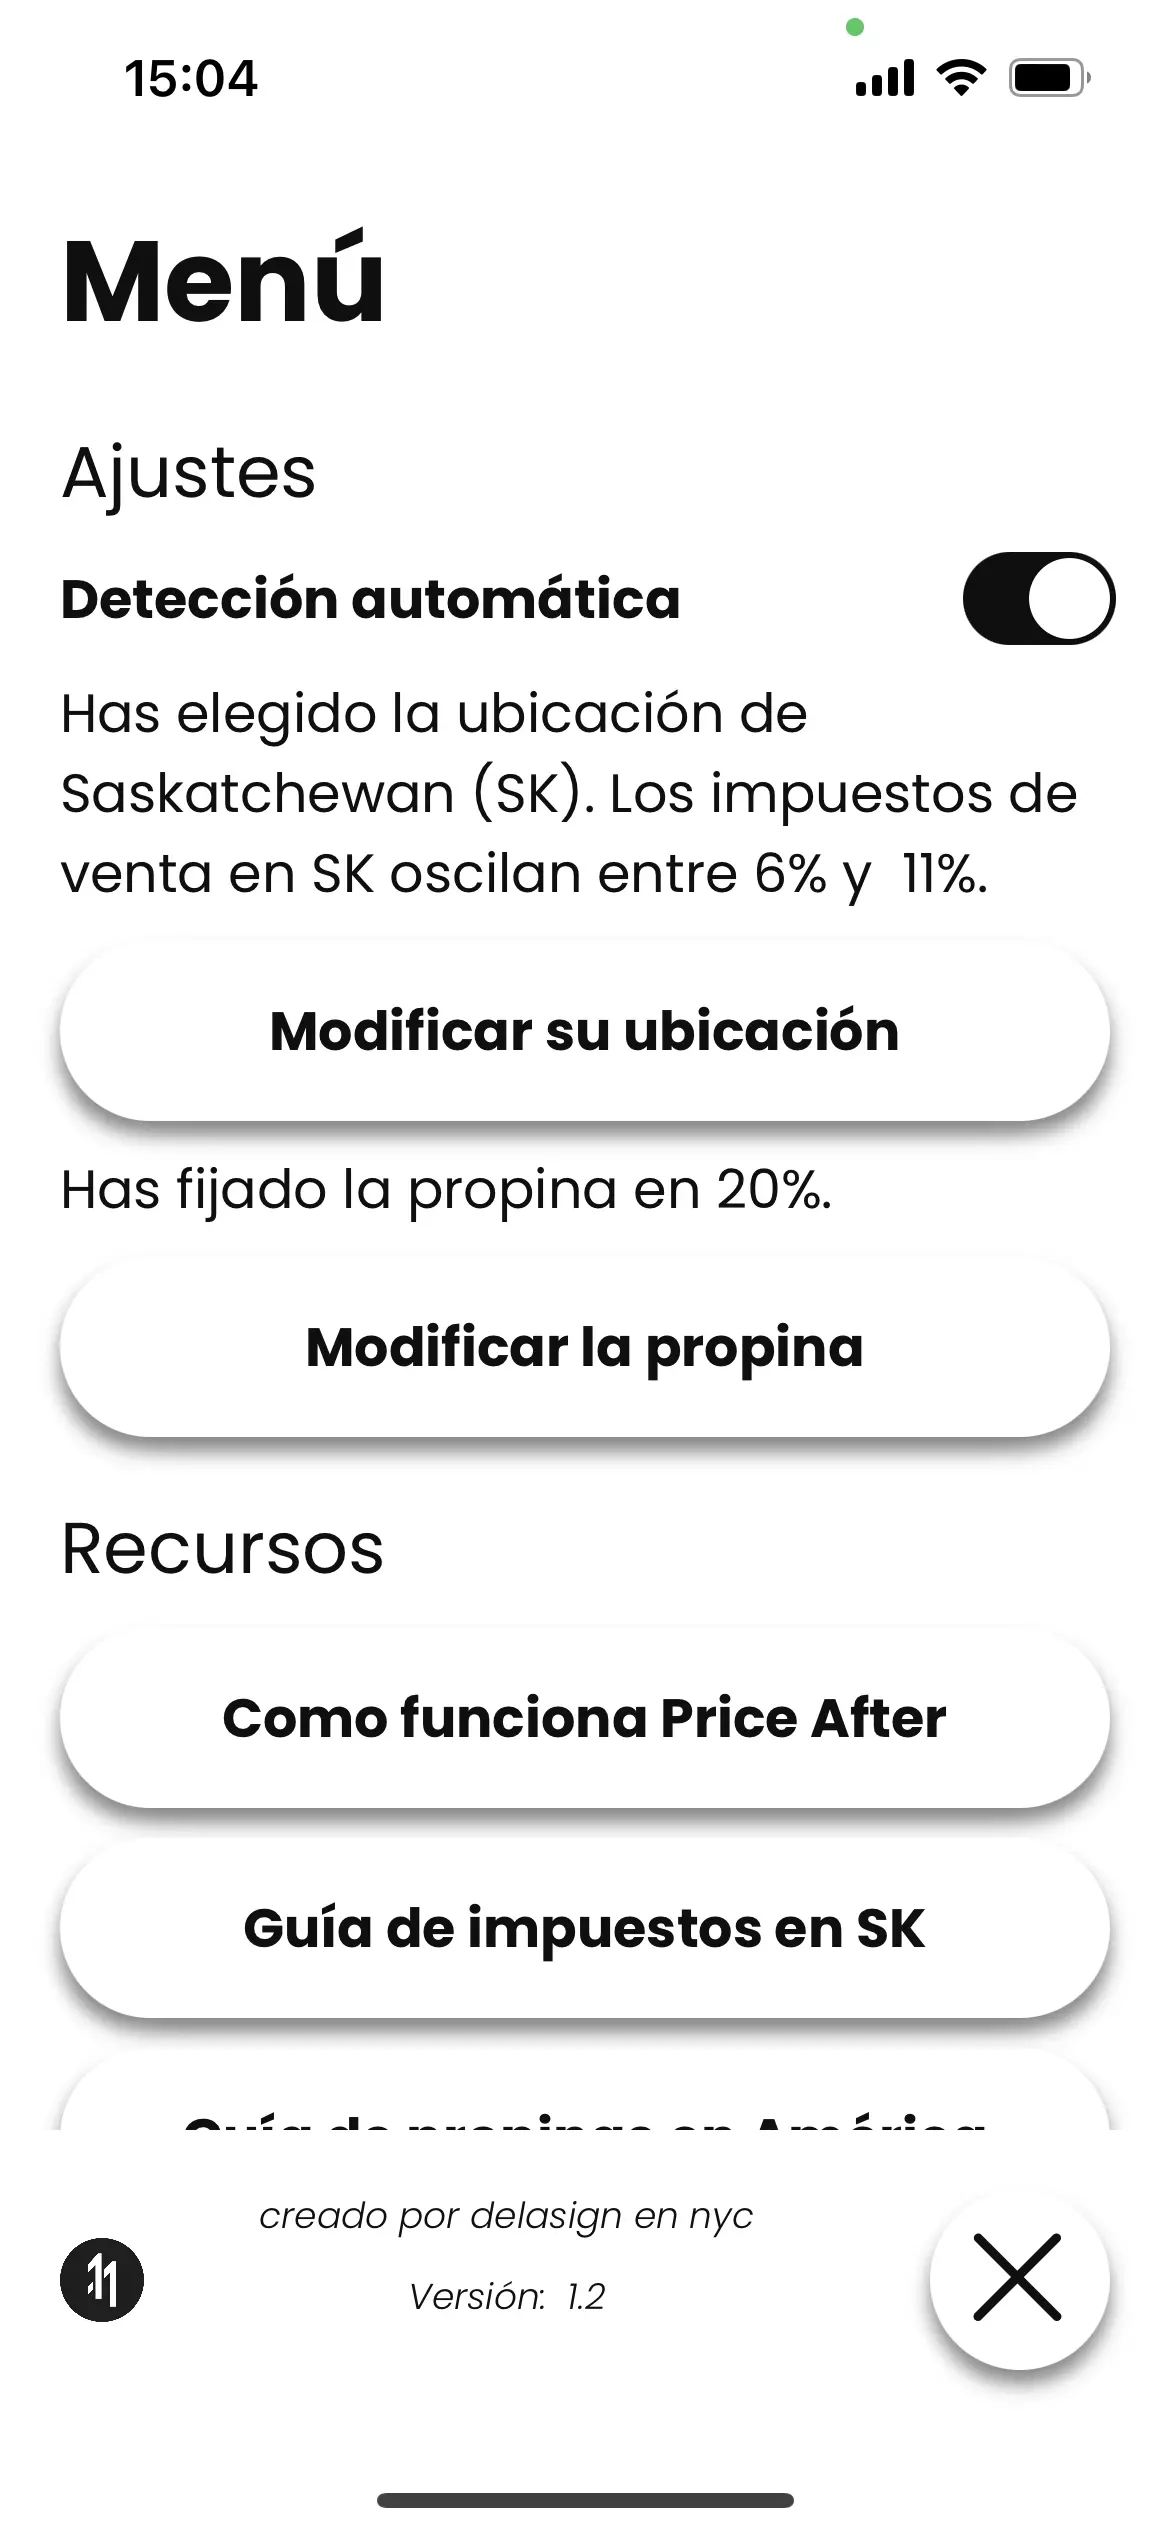 A screenshot of the Price After app, on the menu screen showing the app working in Spanish.